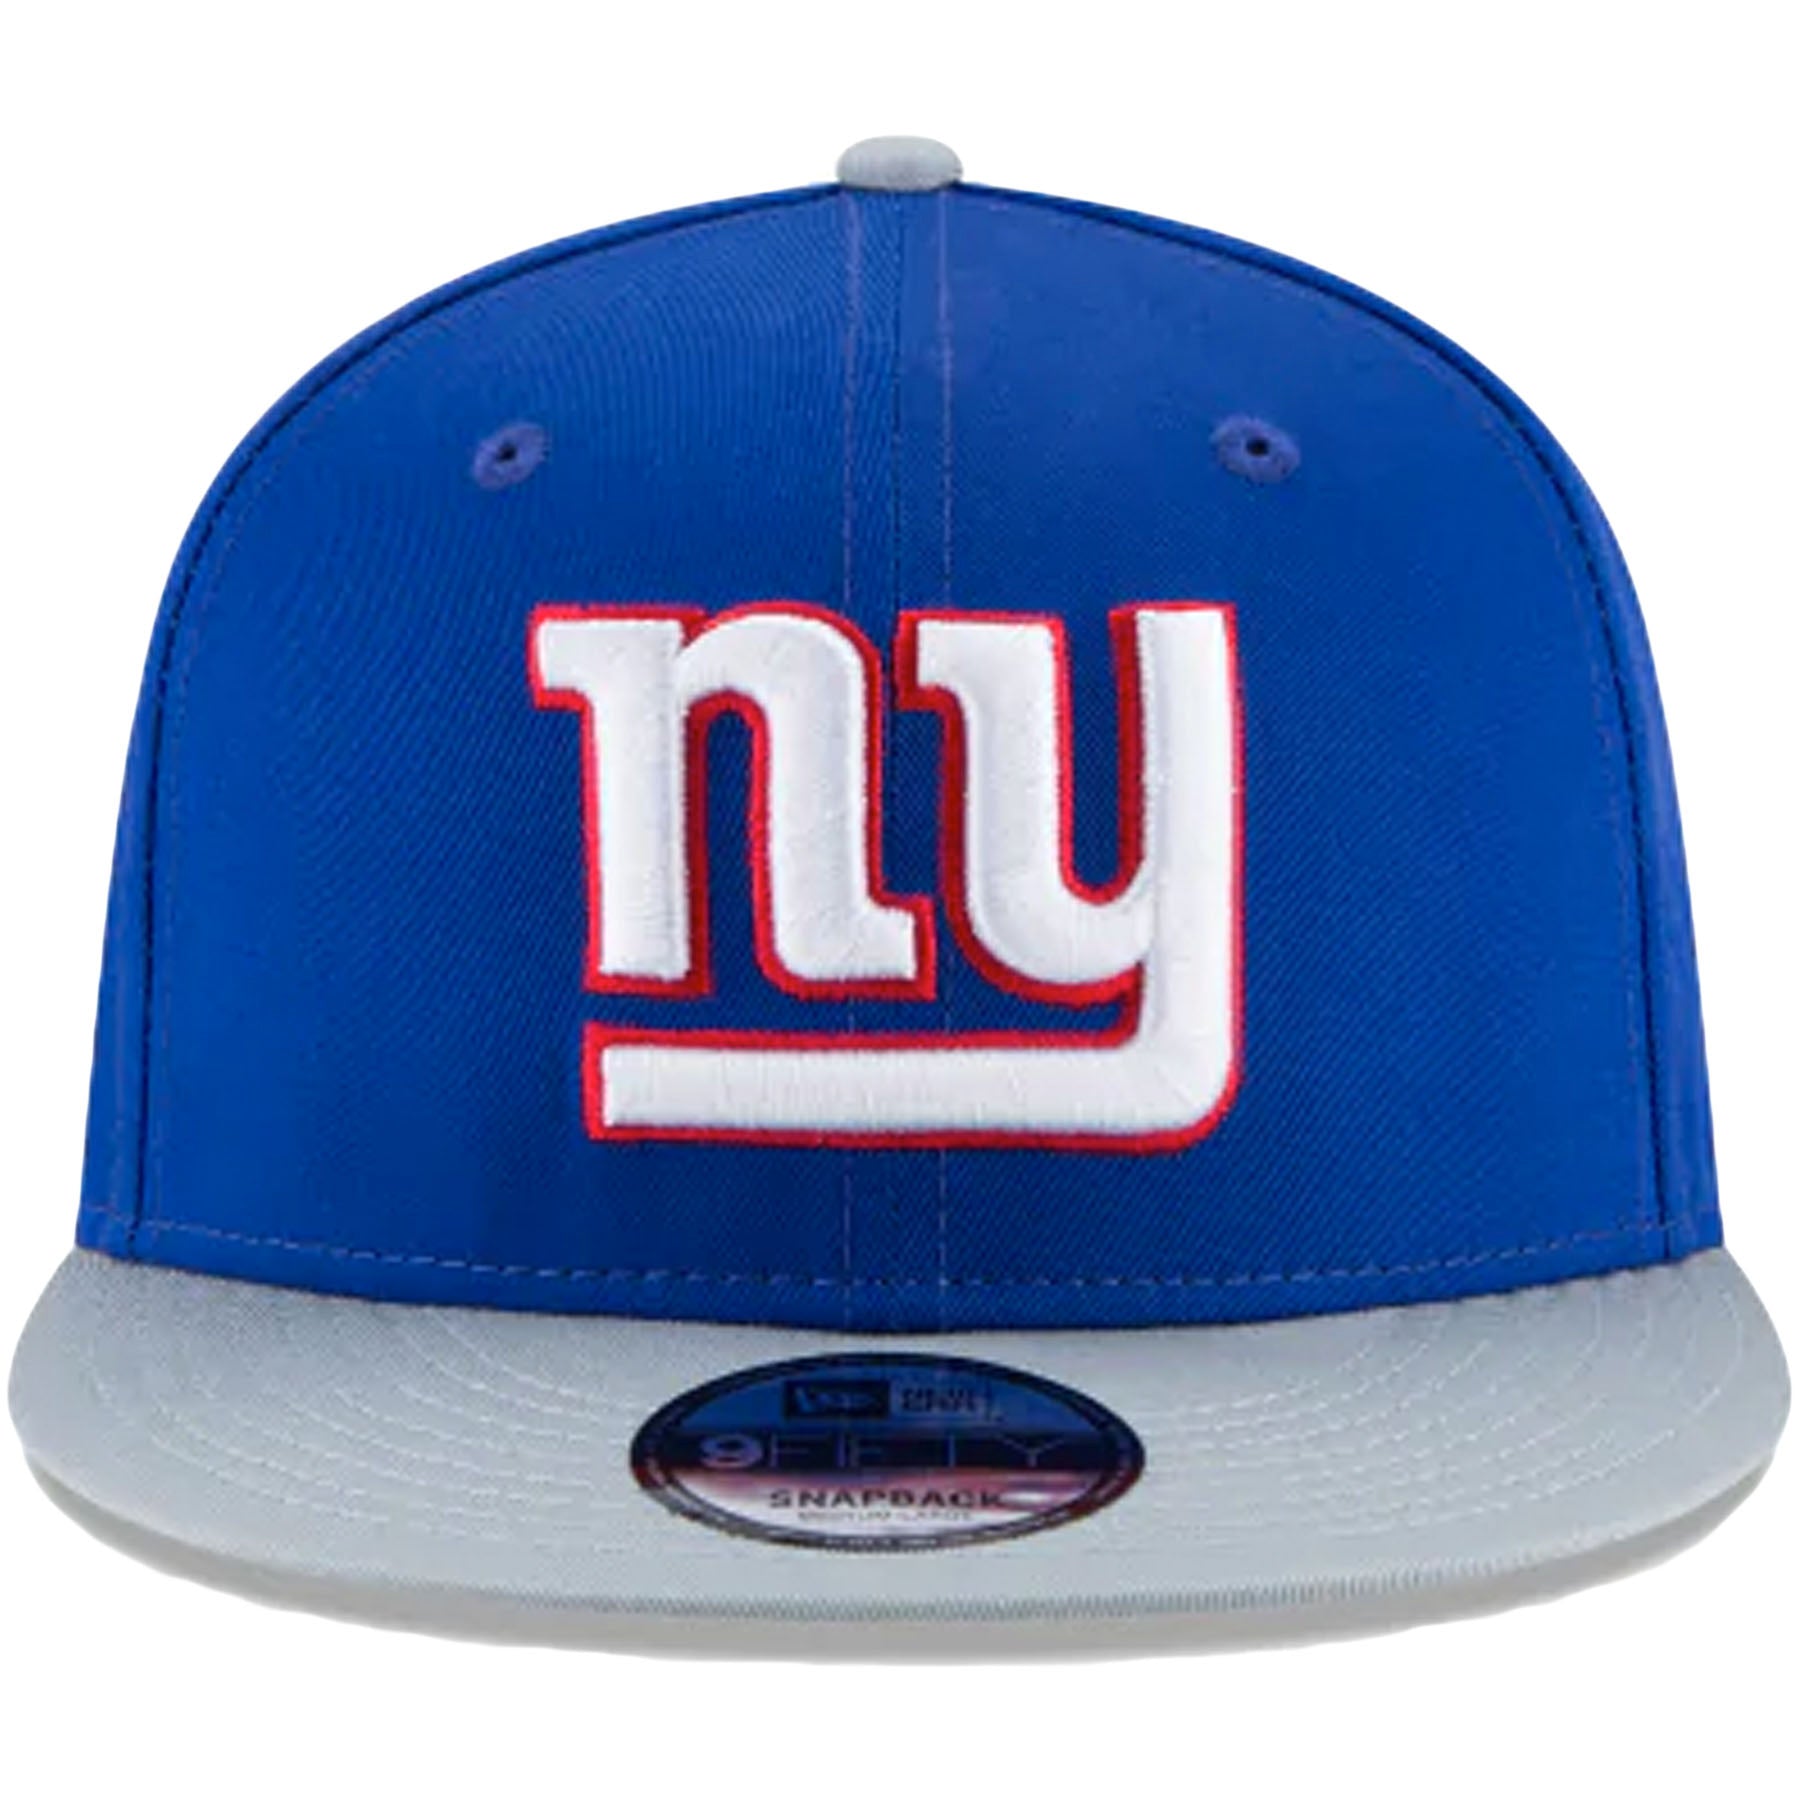 new york giants youth hat